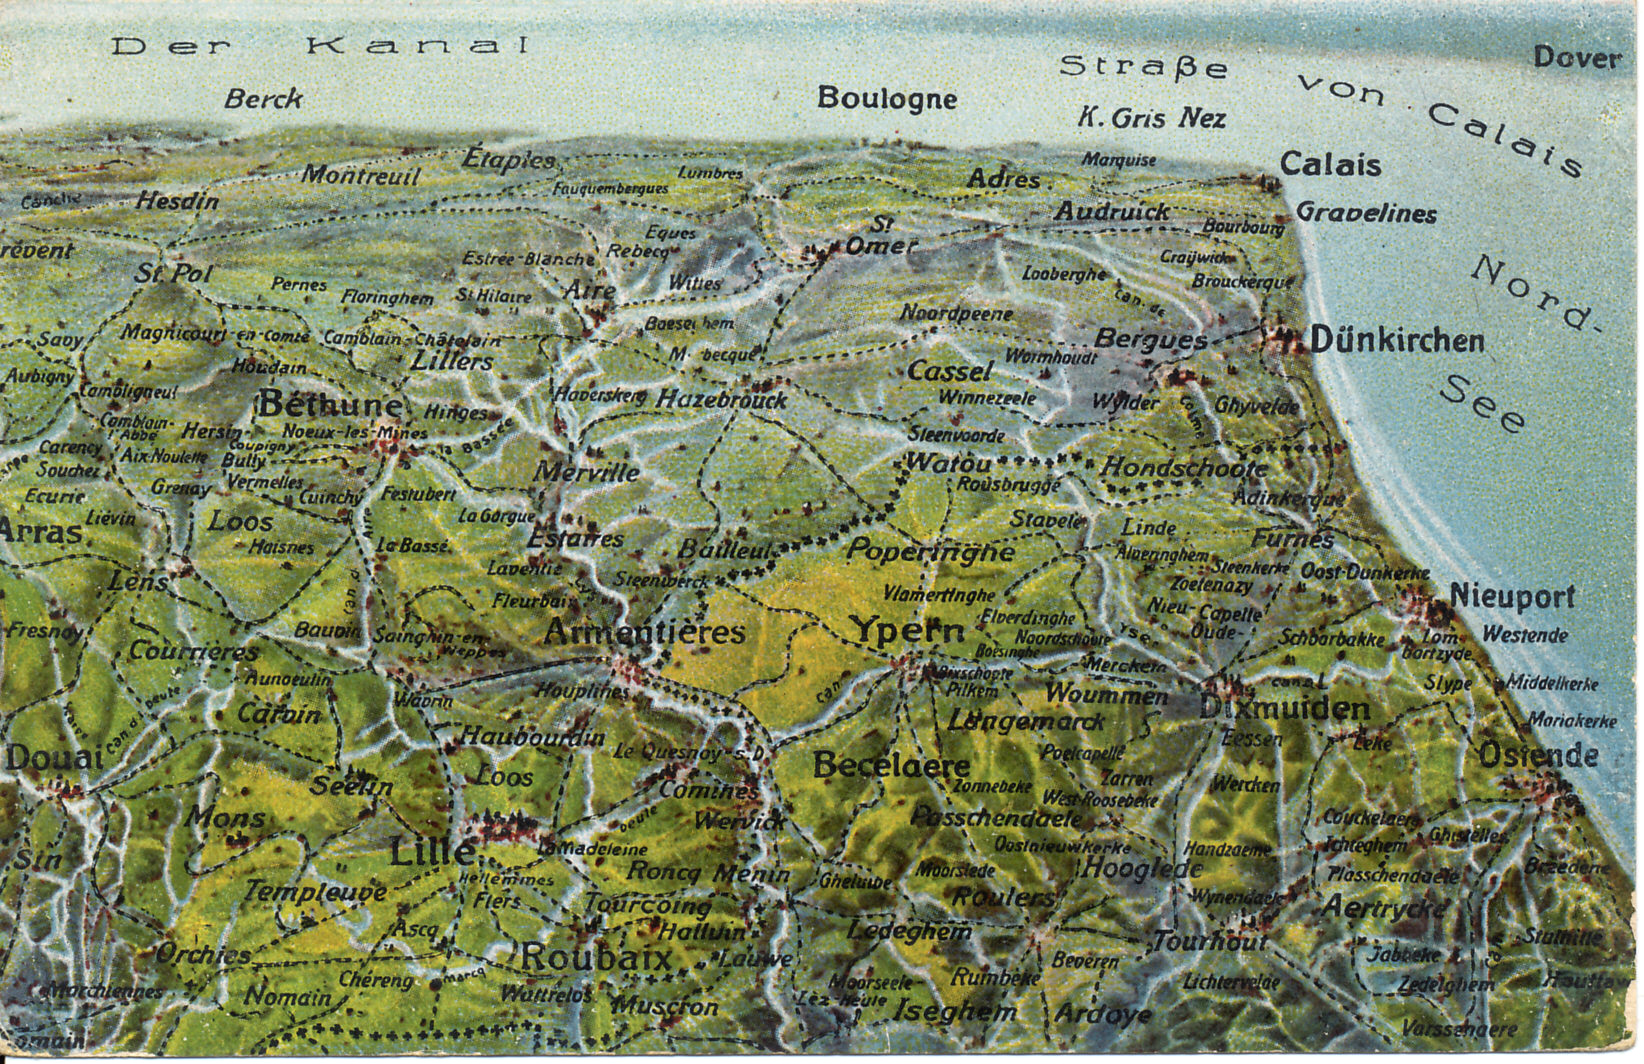 German postcard map of the Western Front in Flanders, looking south and including Lille, Arras, Calais, and Ostend. In the Battle of the Yser in October, 1914, the Belgian Army held the territory south of the Yser Canal, visible between Nieuport, Dixmude, and Ypres (Ypern). Further north is Passchendaele, which British forces took at great cost in 1917.